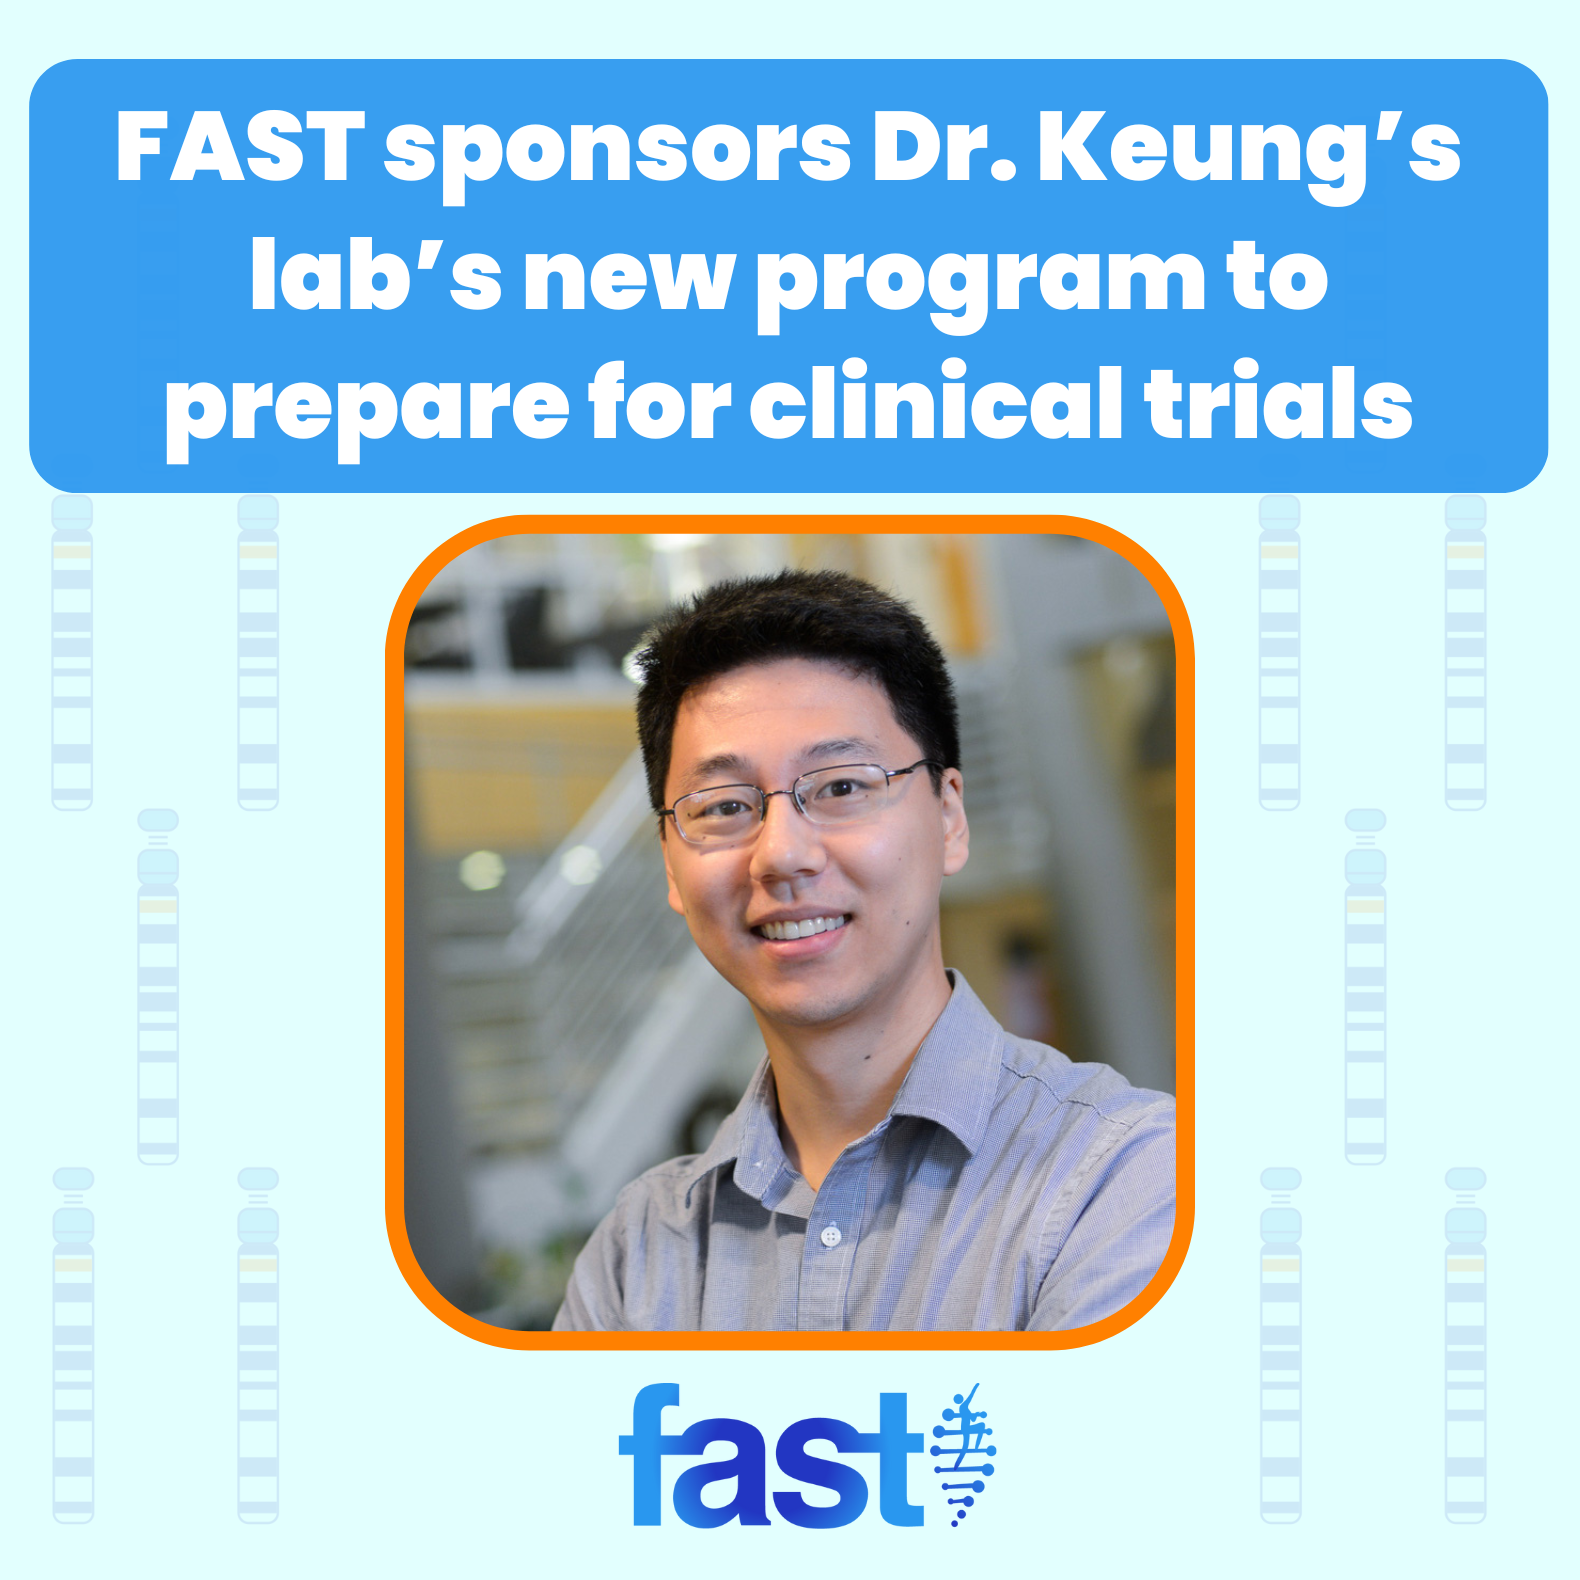 FAST sponsors Dr. Keung’s lab’s new program to prepare for clinical trials - with a photo of Dr. Keung